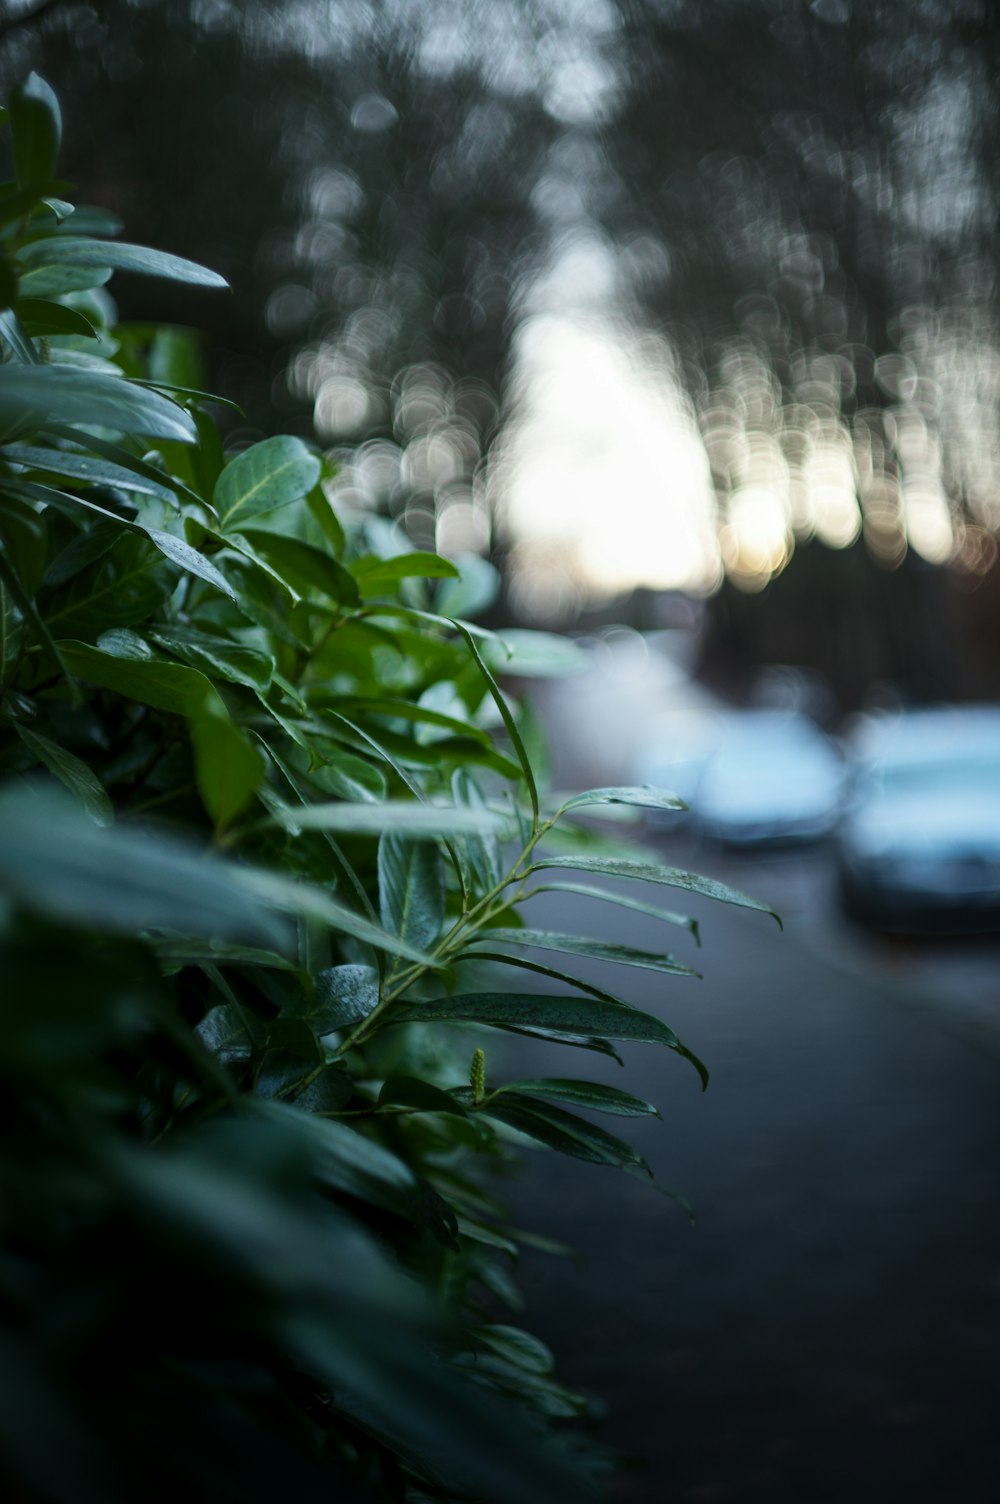 a close up of a plant with cars in the background